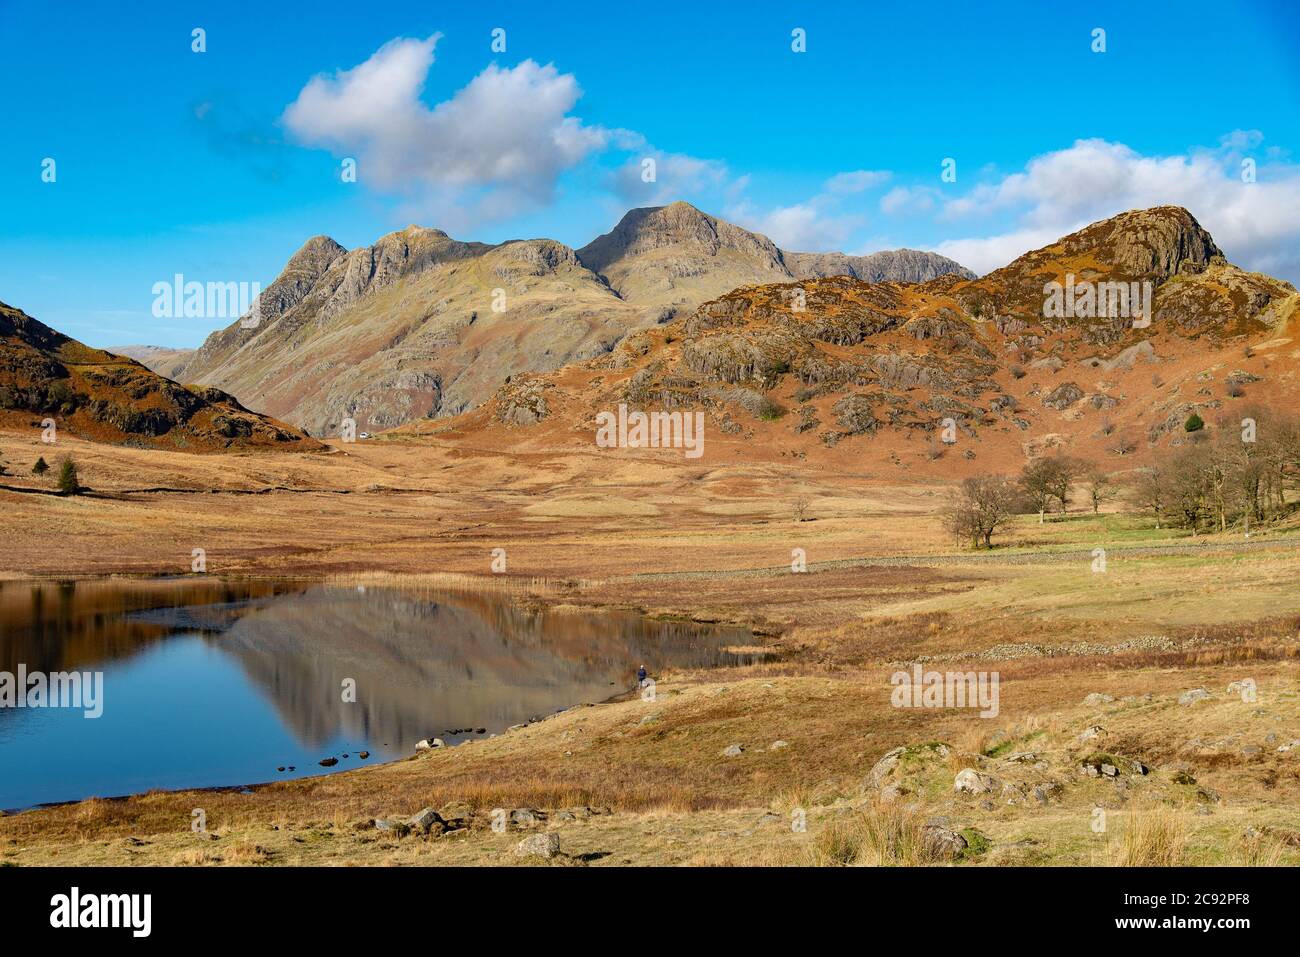 Blea Tarn, Langdale, Cumbria, The Lake District with Langdale Fell and Langdale Pikes in the distance. Stock Photo